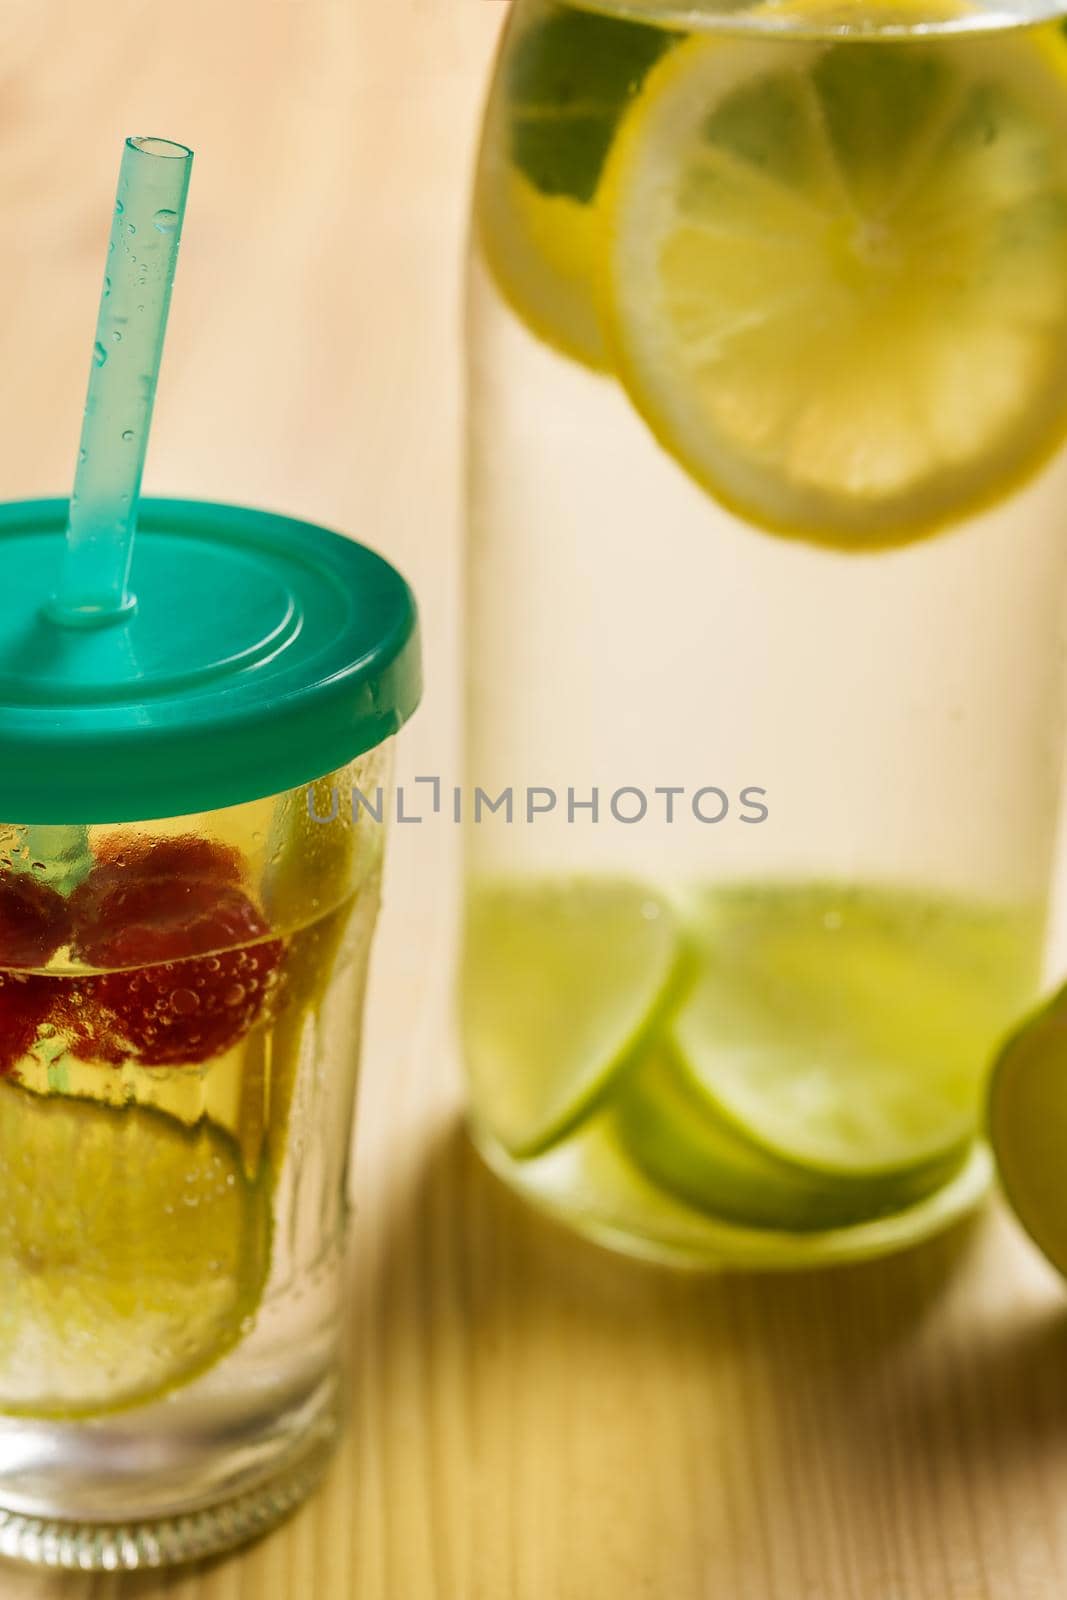 vertical photo of bottle and glass with cold water and slices of lime, lemon and red berries, illuminated by sunlight on a wooden table with some pieces of citrus, summer refreshments background